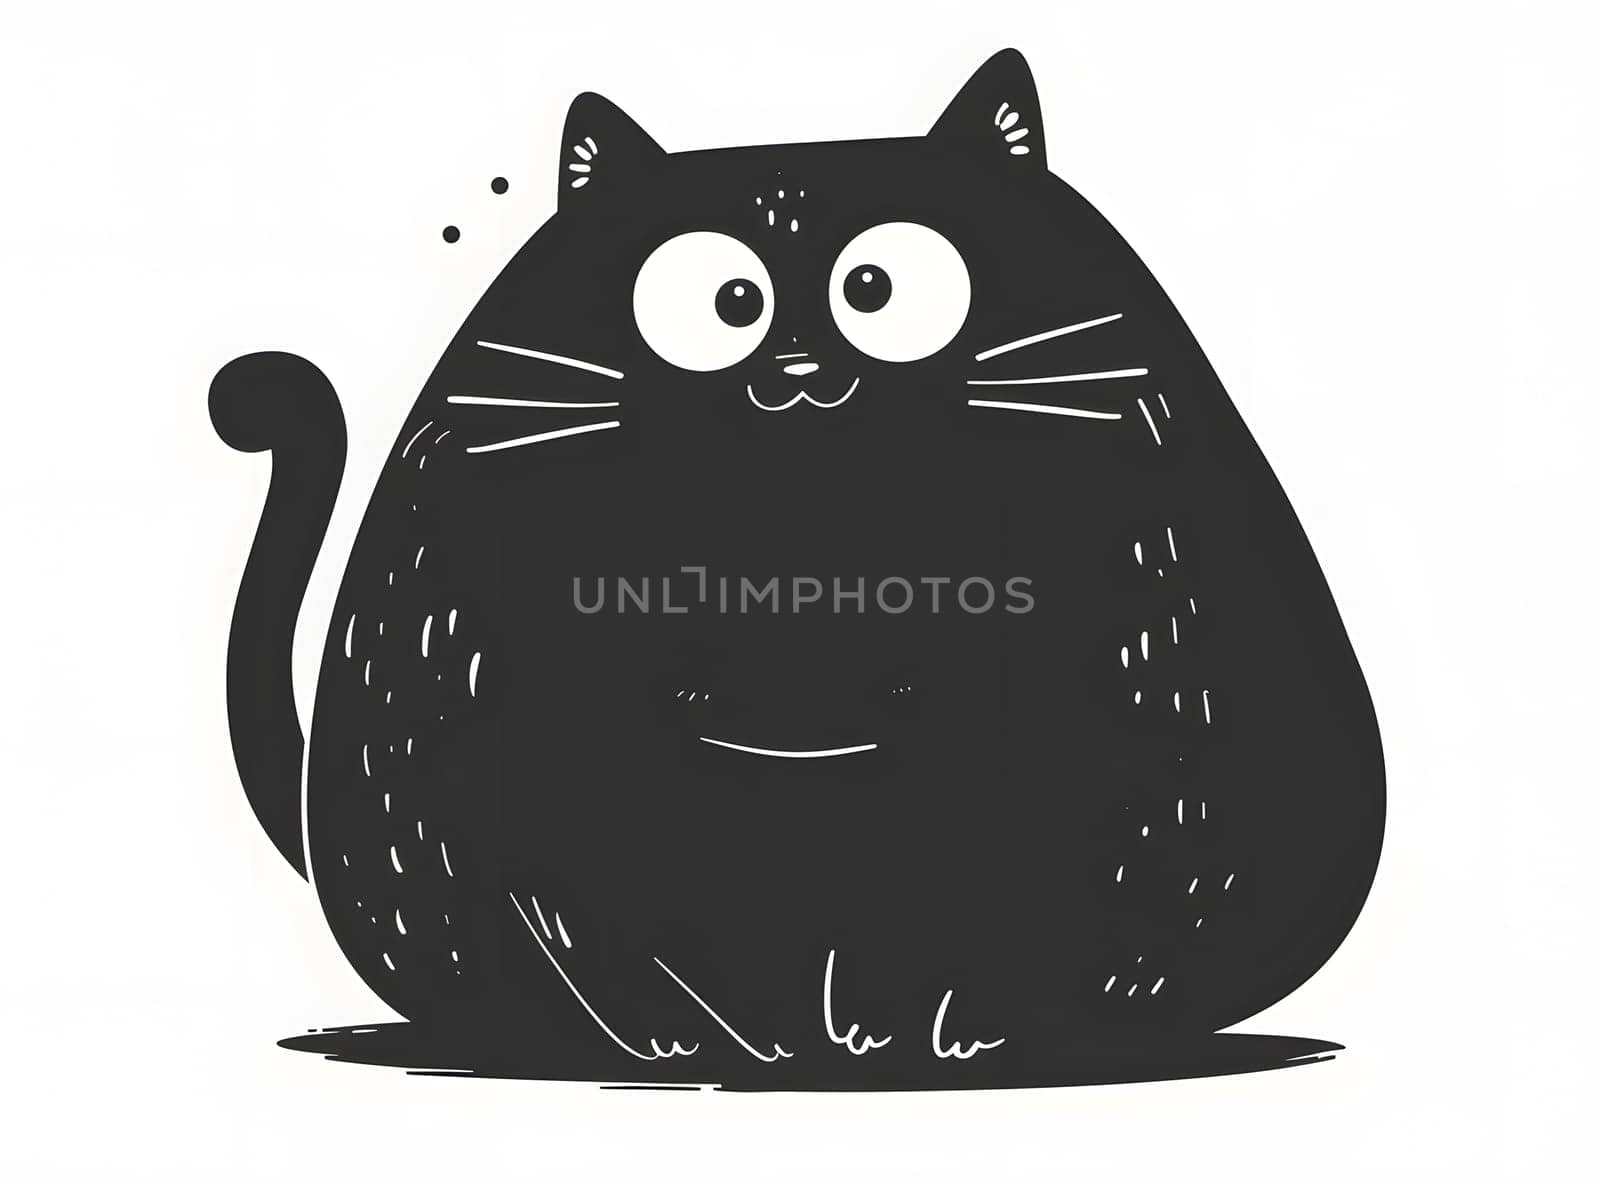 A grey Felidae with big eyes, small to mediumsized, is sitting on a white background. It can be used as a toy, art, or even on drinkware and serveware